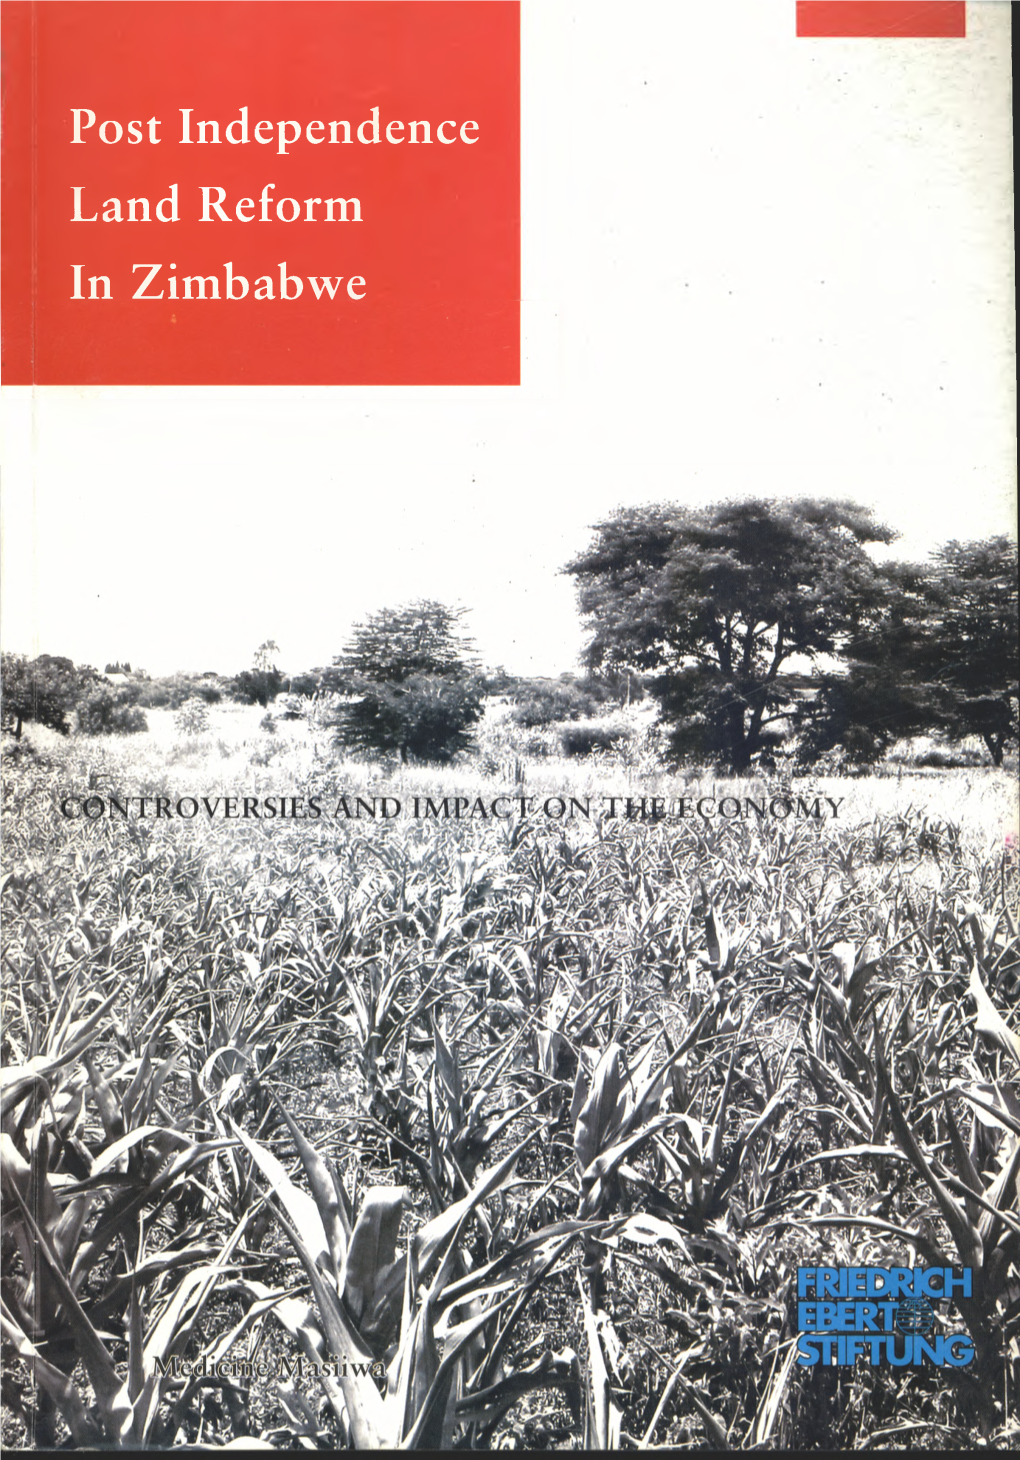 Post Independence Land Reform in Zimbabwe POST-INDEPENDENCE LAND REFORM in ZIMBABWE